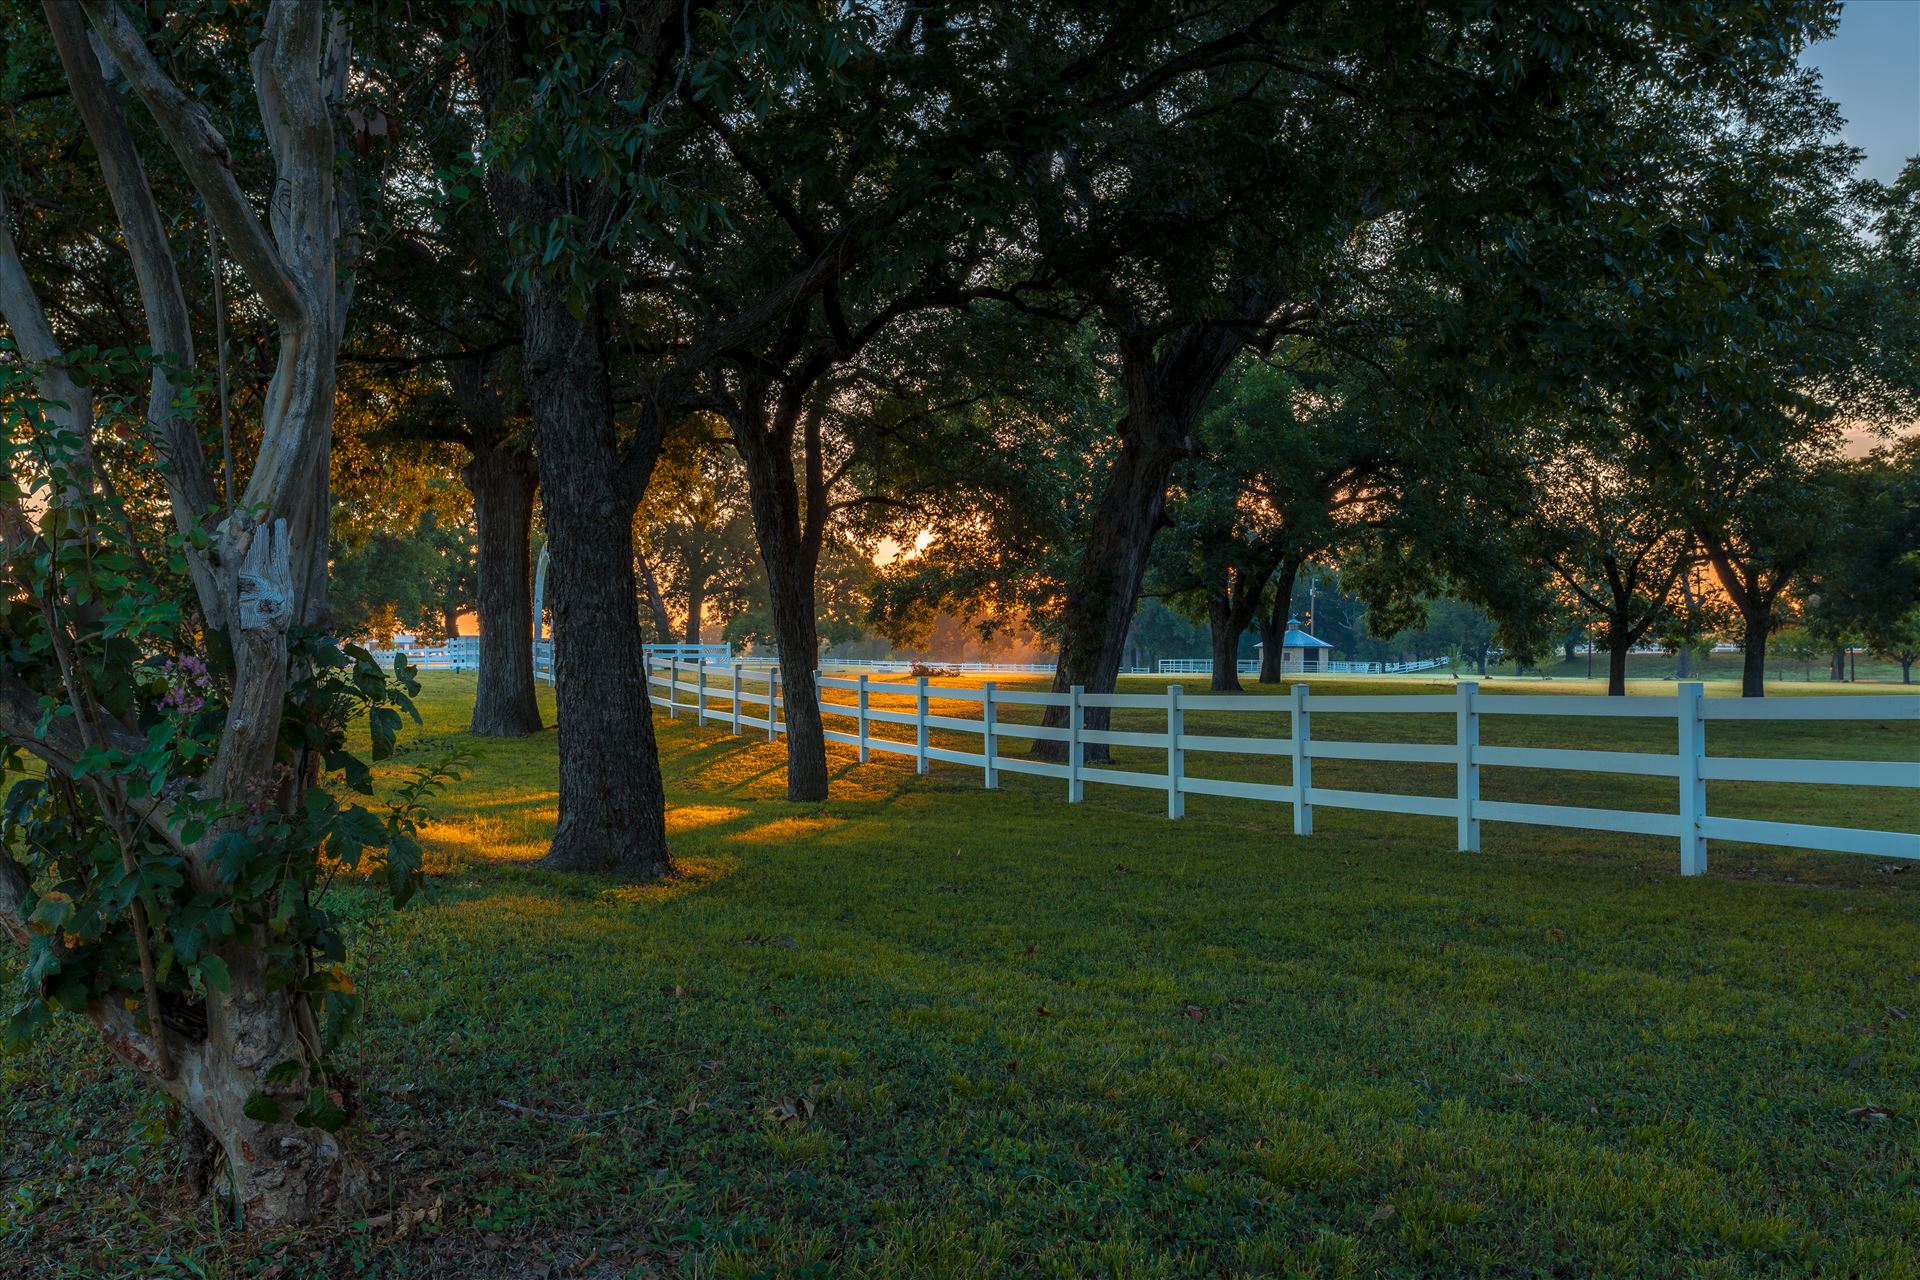 20171001_White Fence_027-HDR.jpg -  by Charles Smith Photography